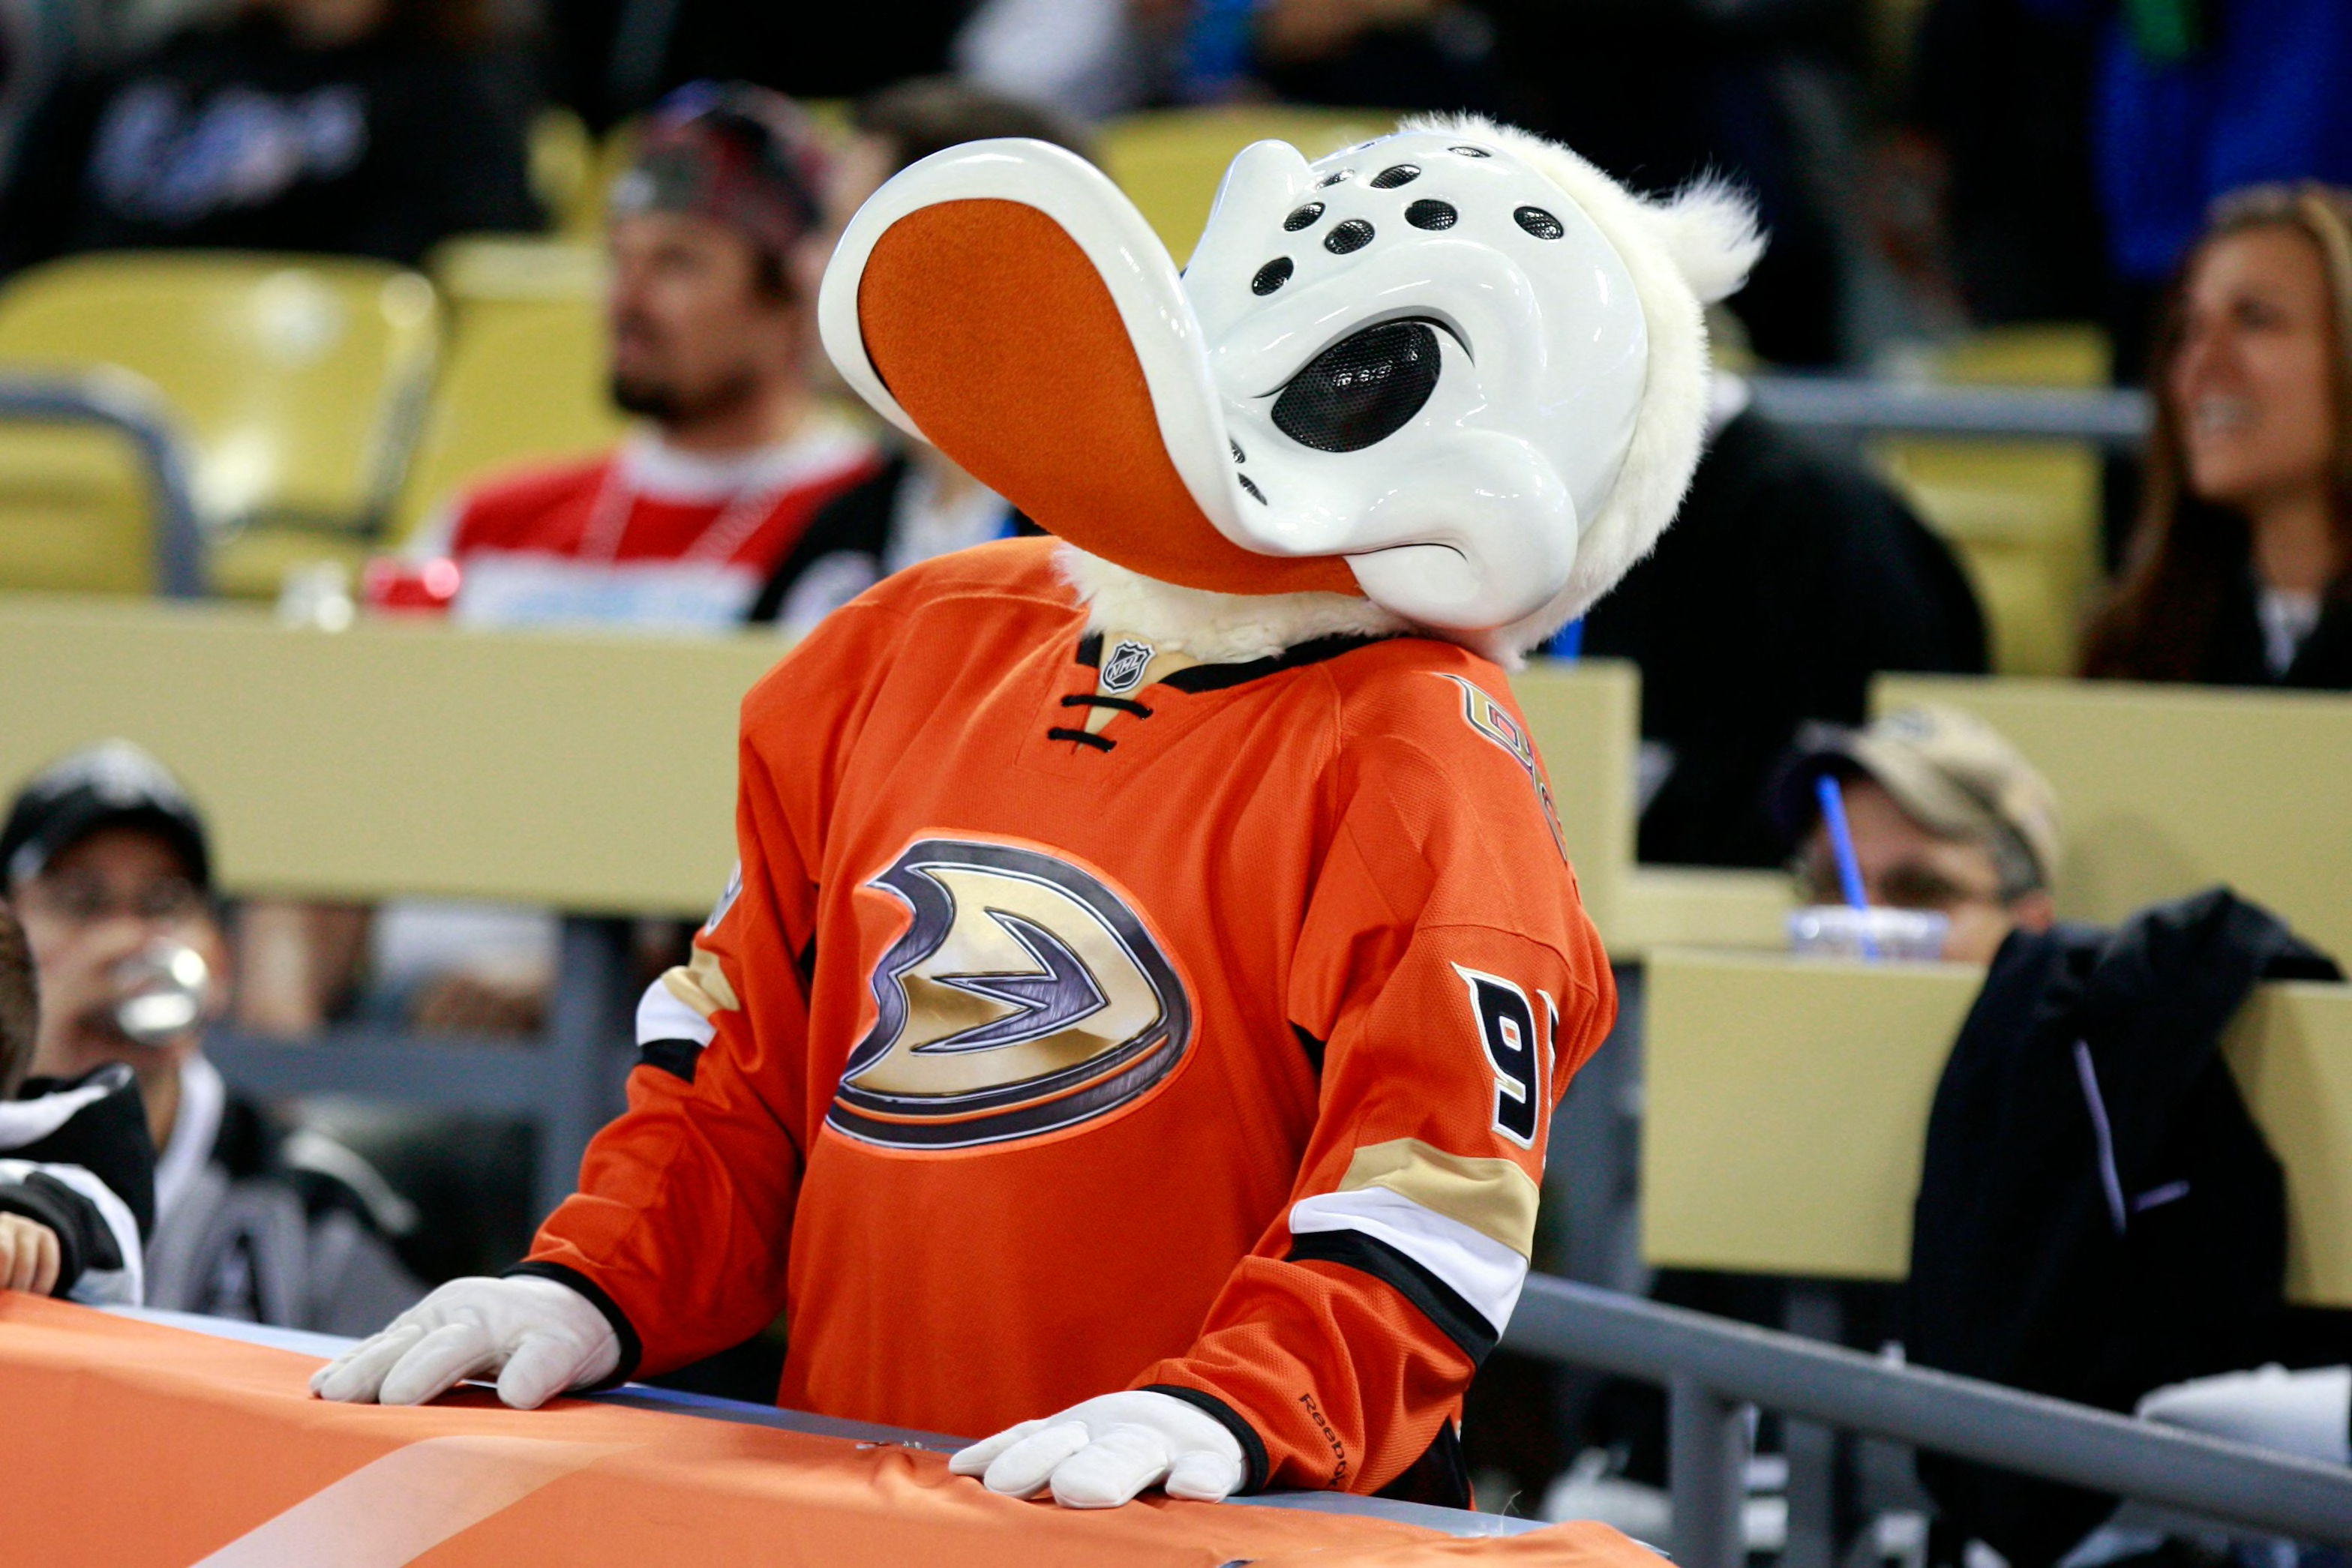 Wild Wing, the Anaheim Ducks Mascot: Everything You Need to Know